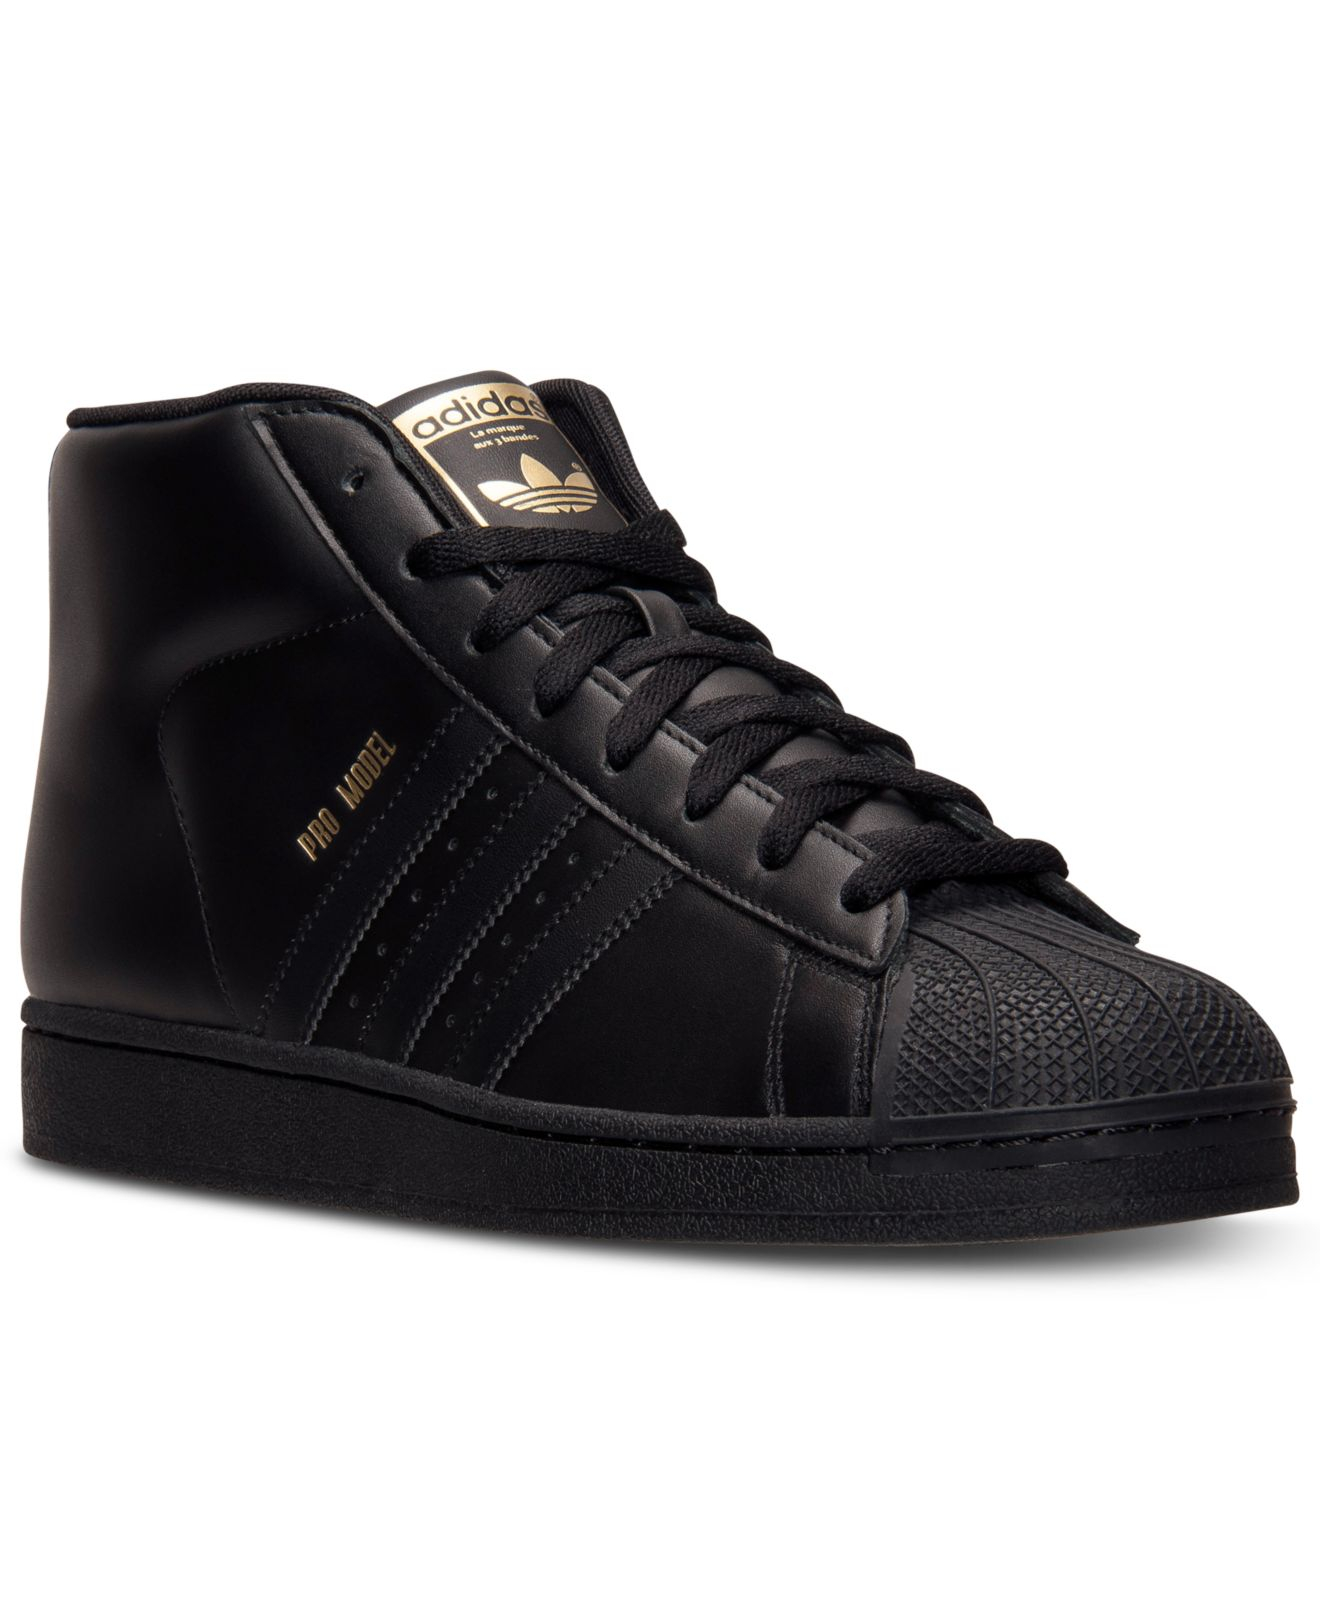 Lyst - adidas Men'S Pro Model Casual Sneakers From Finish Line in Black